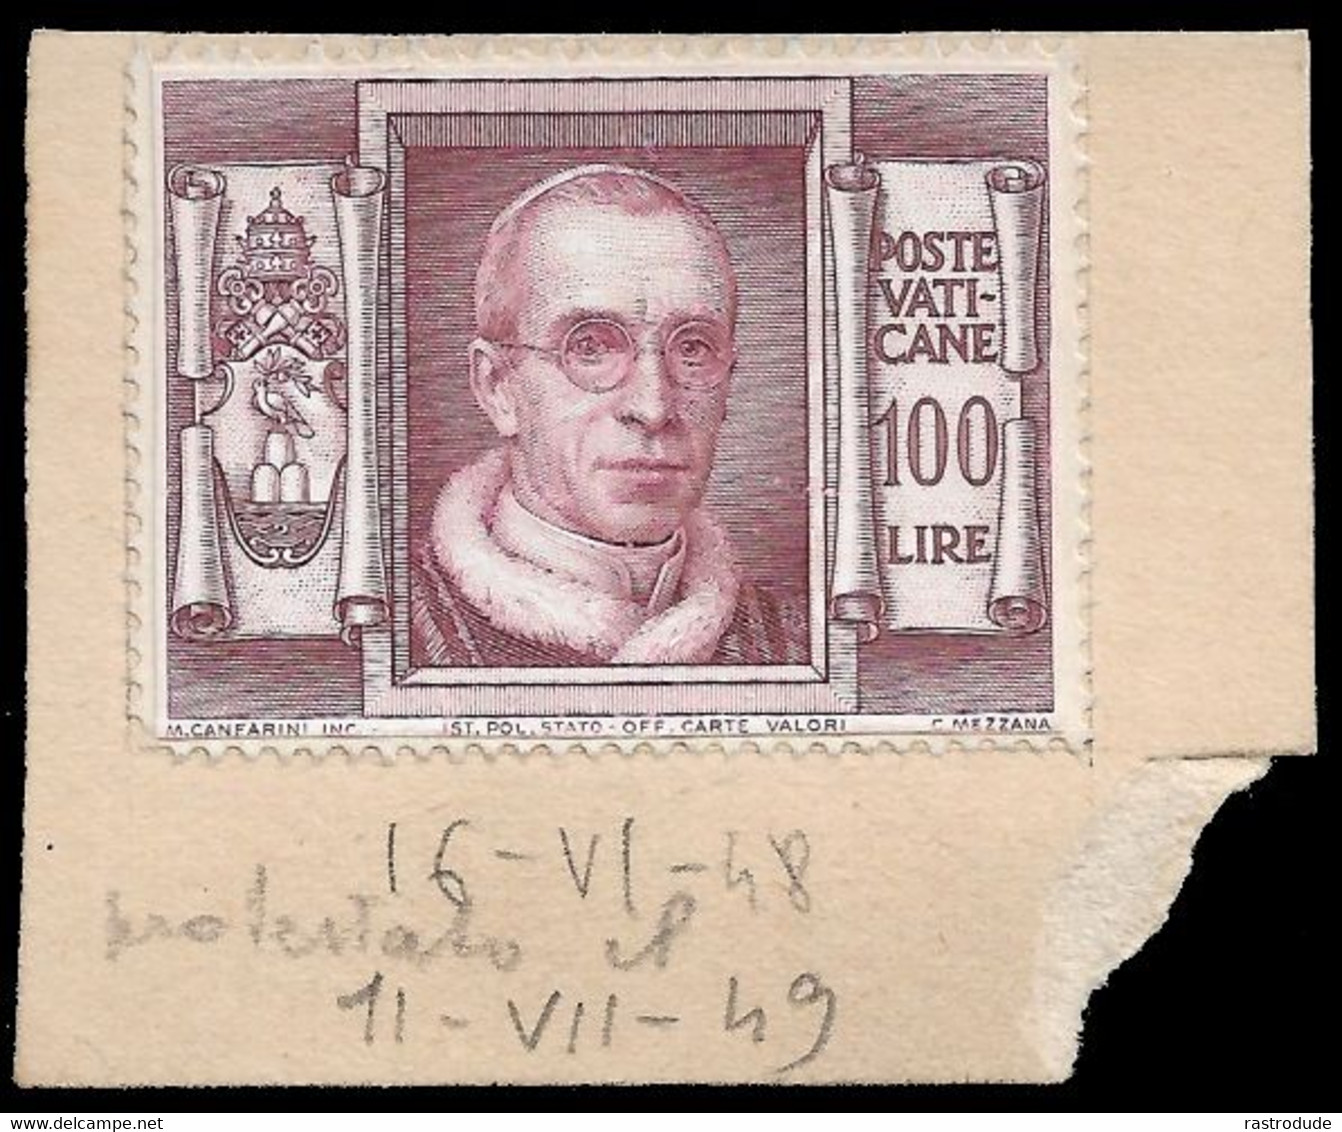 VATICAN CITY - 1948 VERY RARE PROOF / PROVE 100L (Sassone 131) NOT ISSUED COLOR - POPE PIUS XII - Ungebraucht